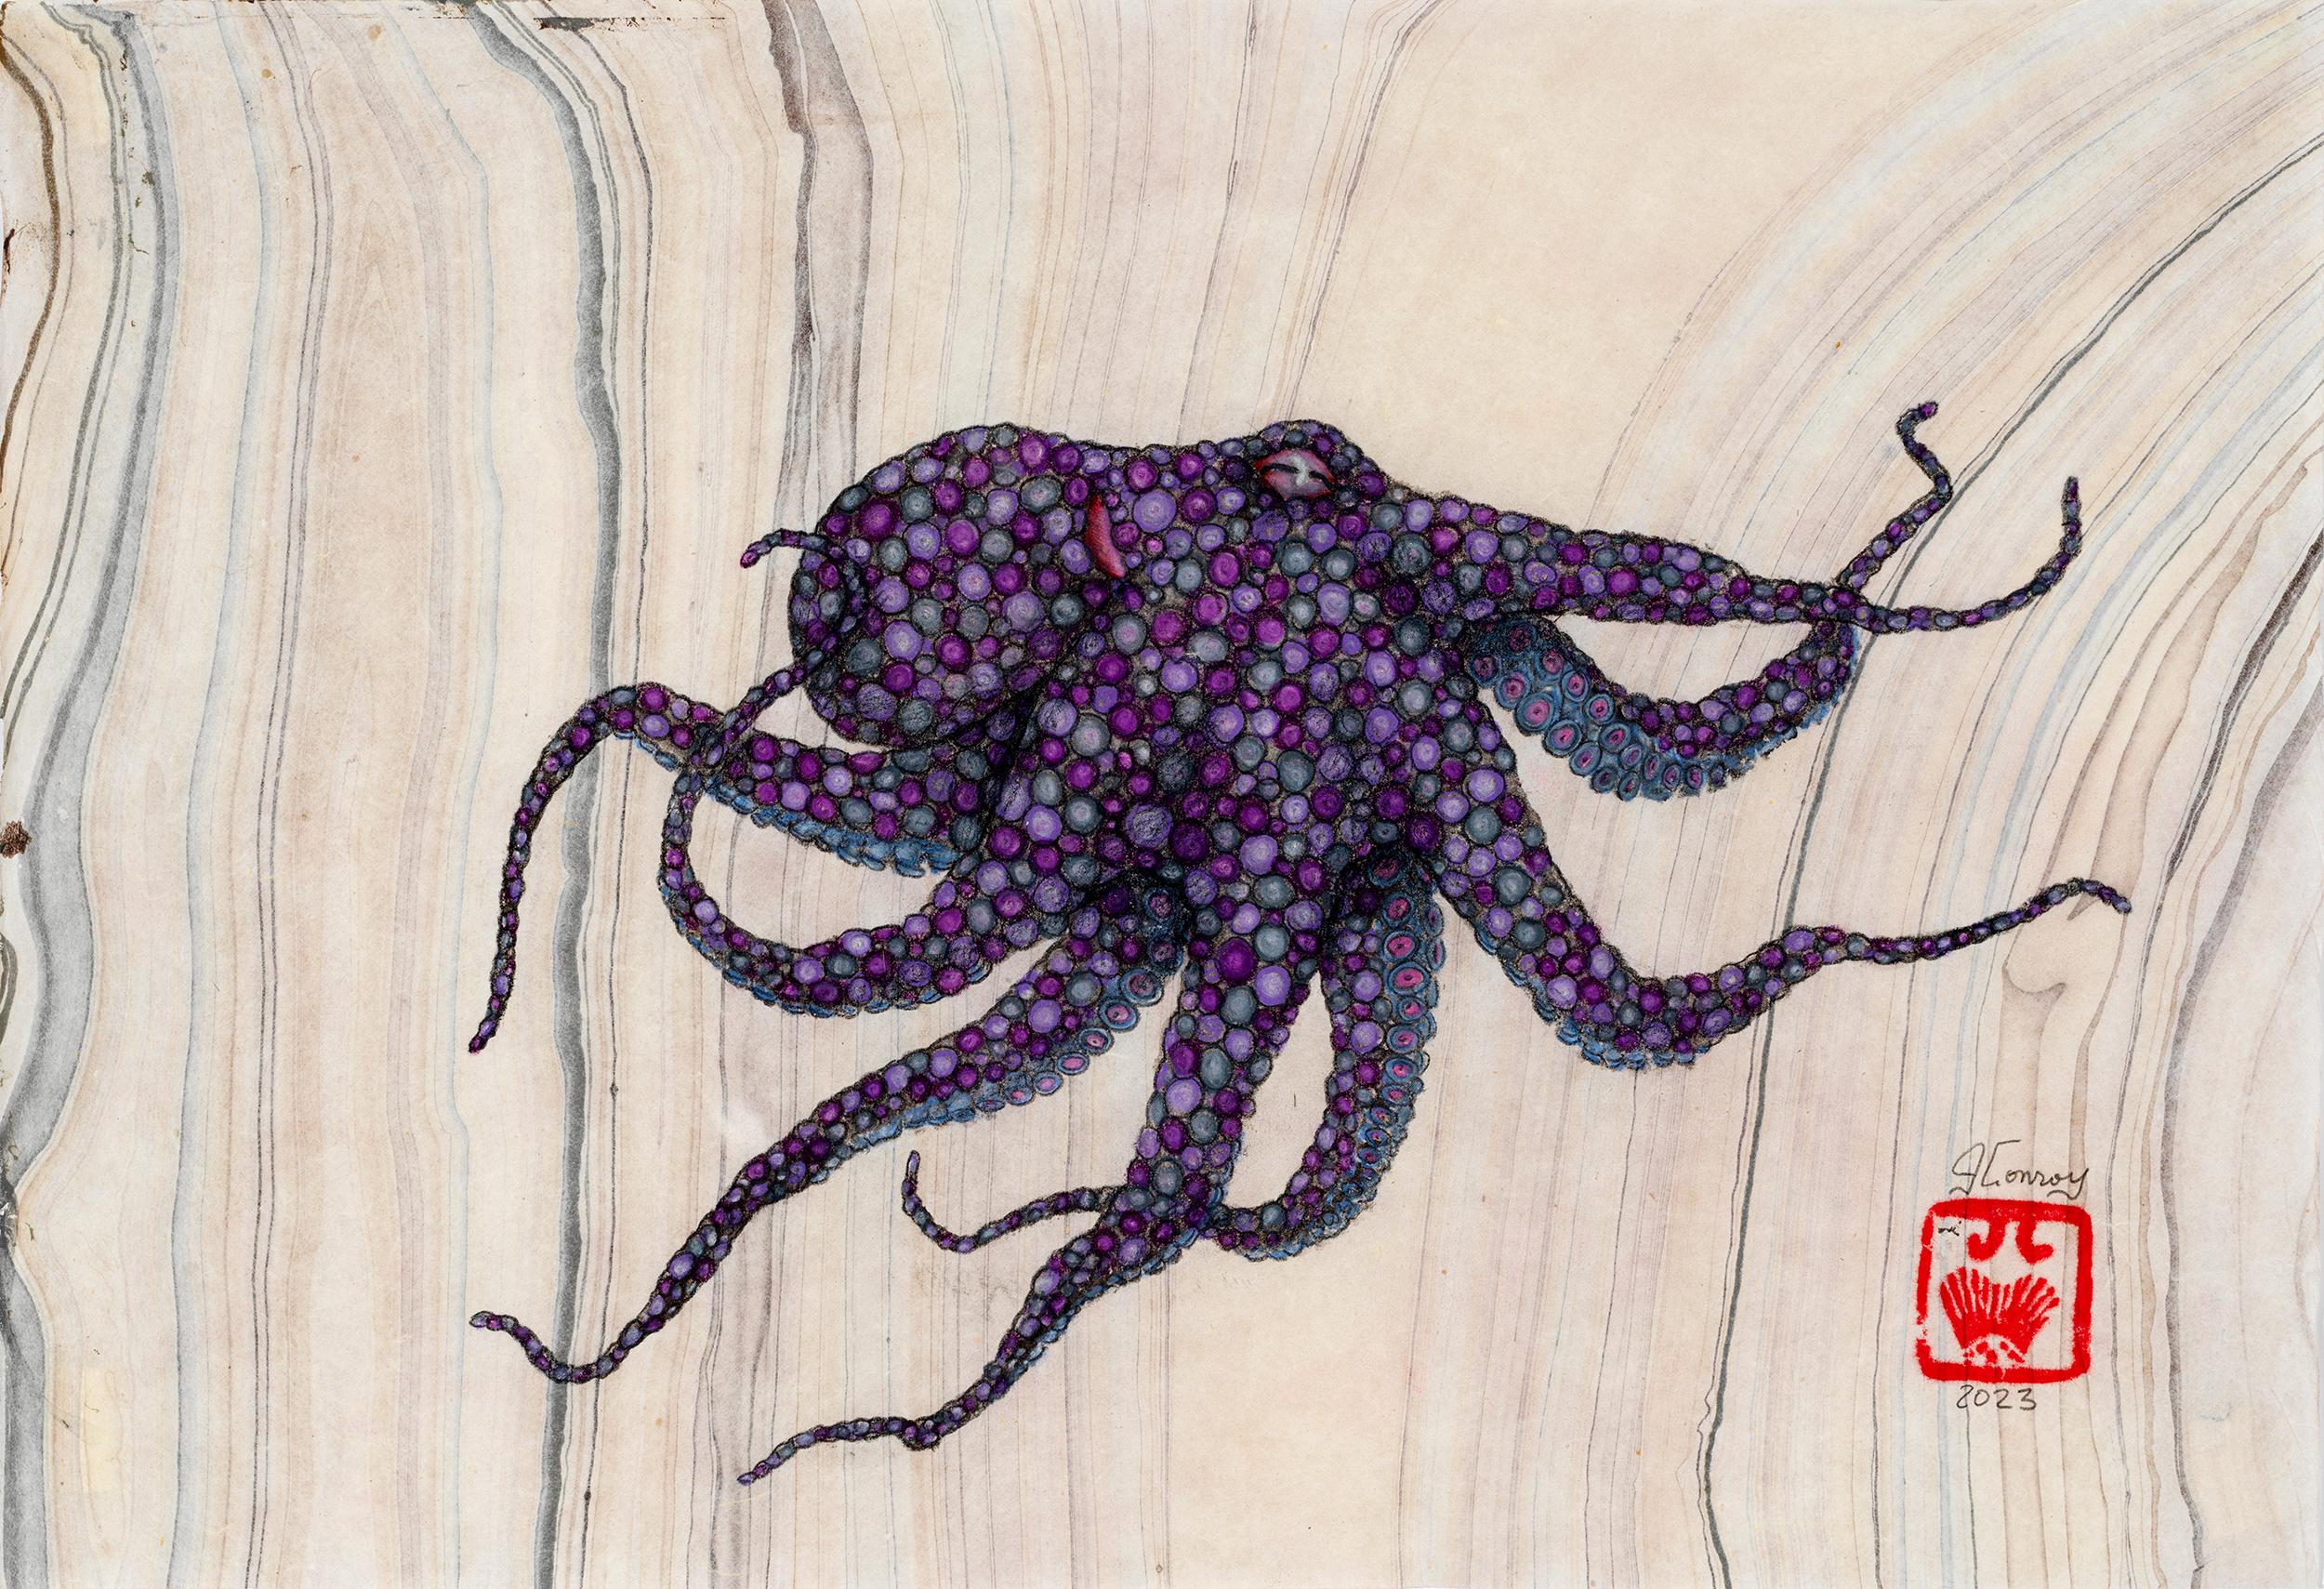 Pinot Noir - Gyotaku Style Sumi Ink Painting of an Octopus on Mulberry Paper